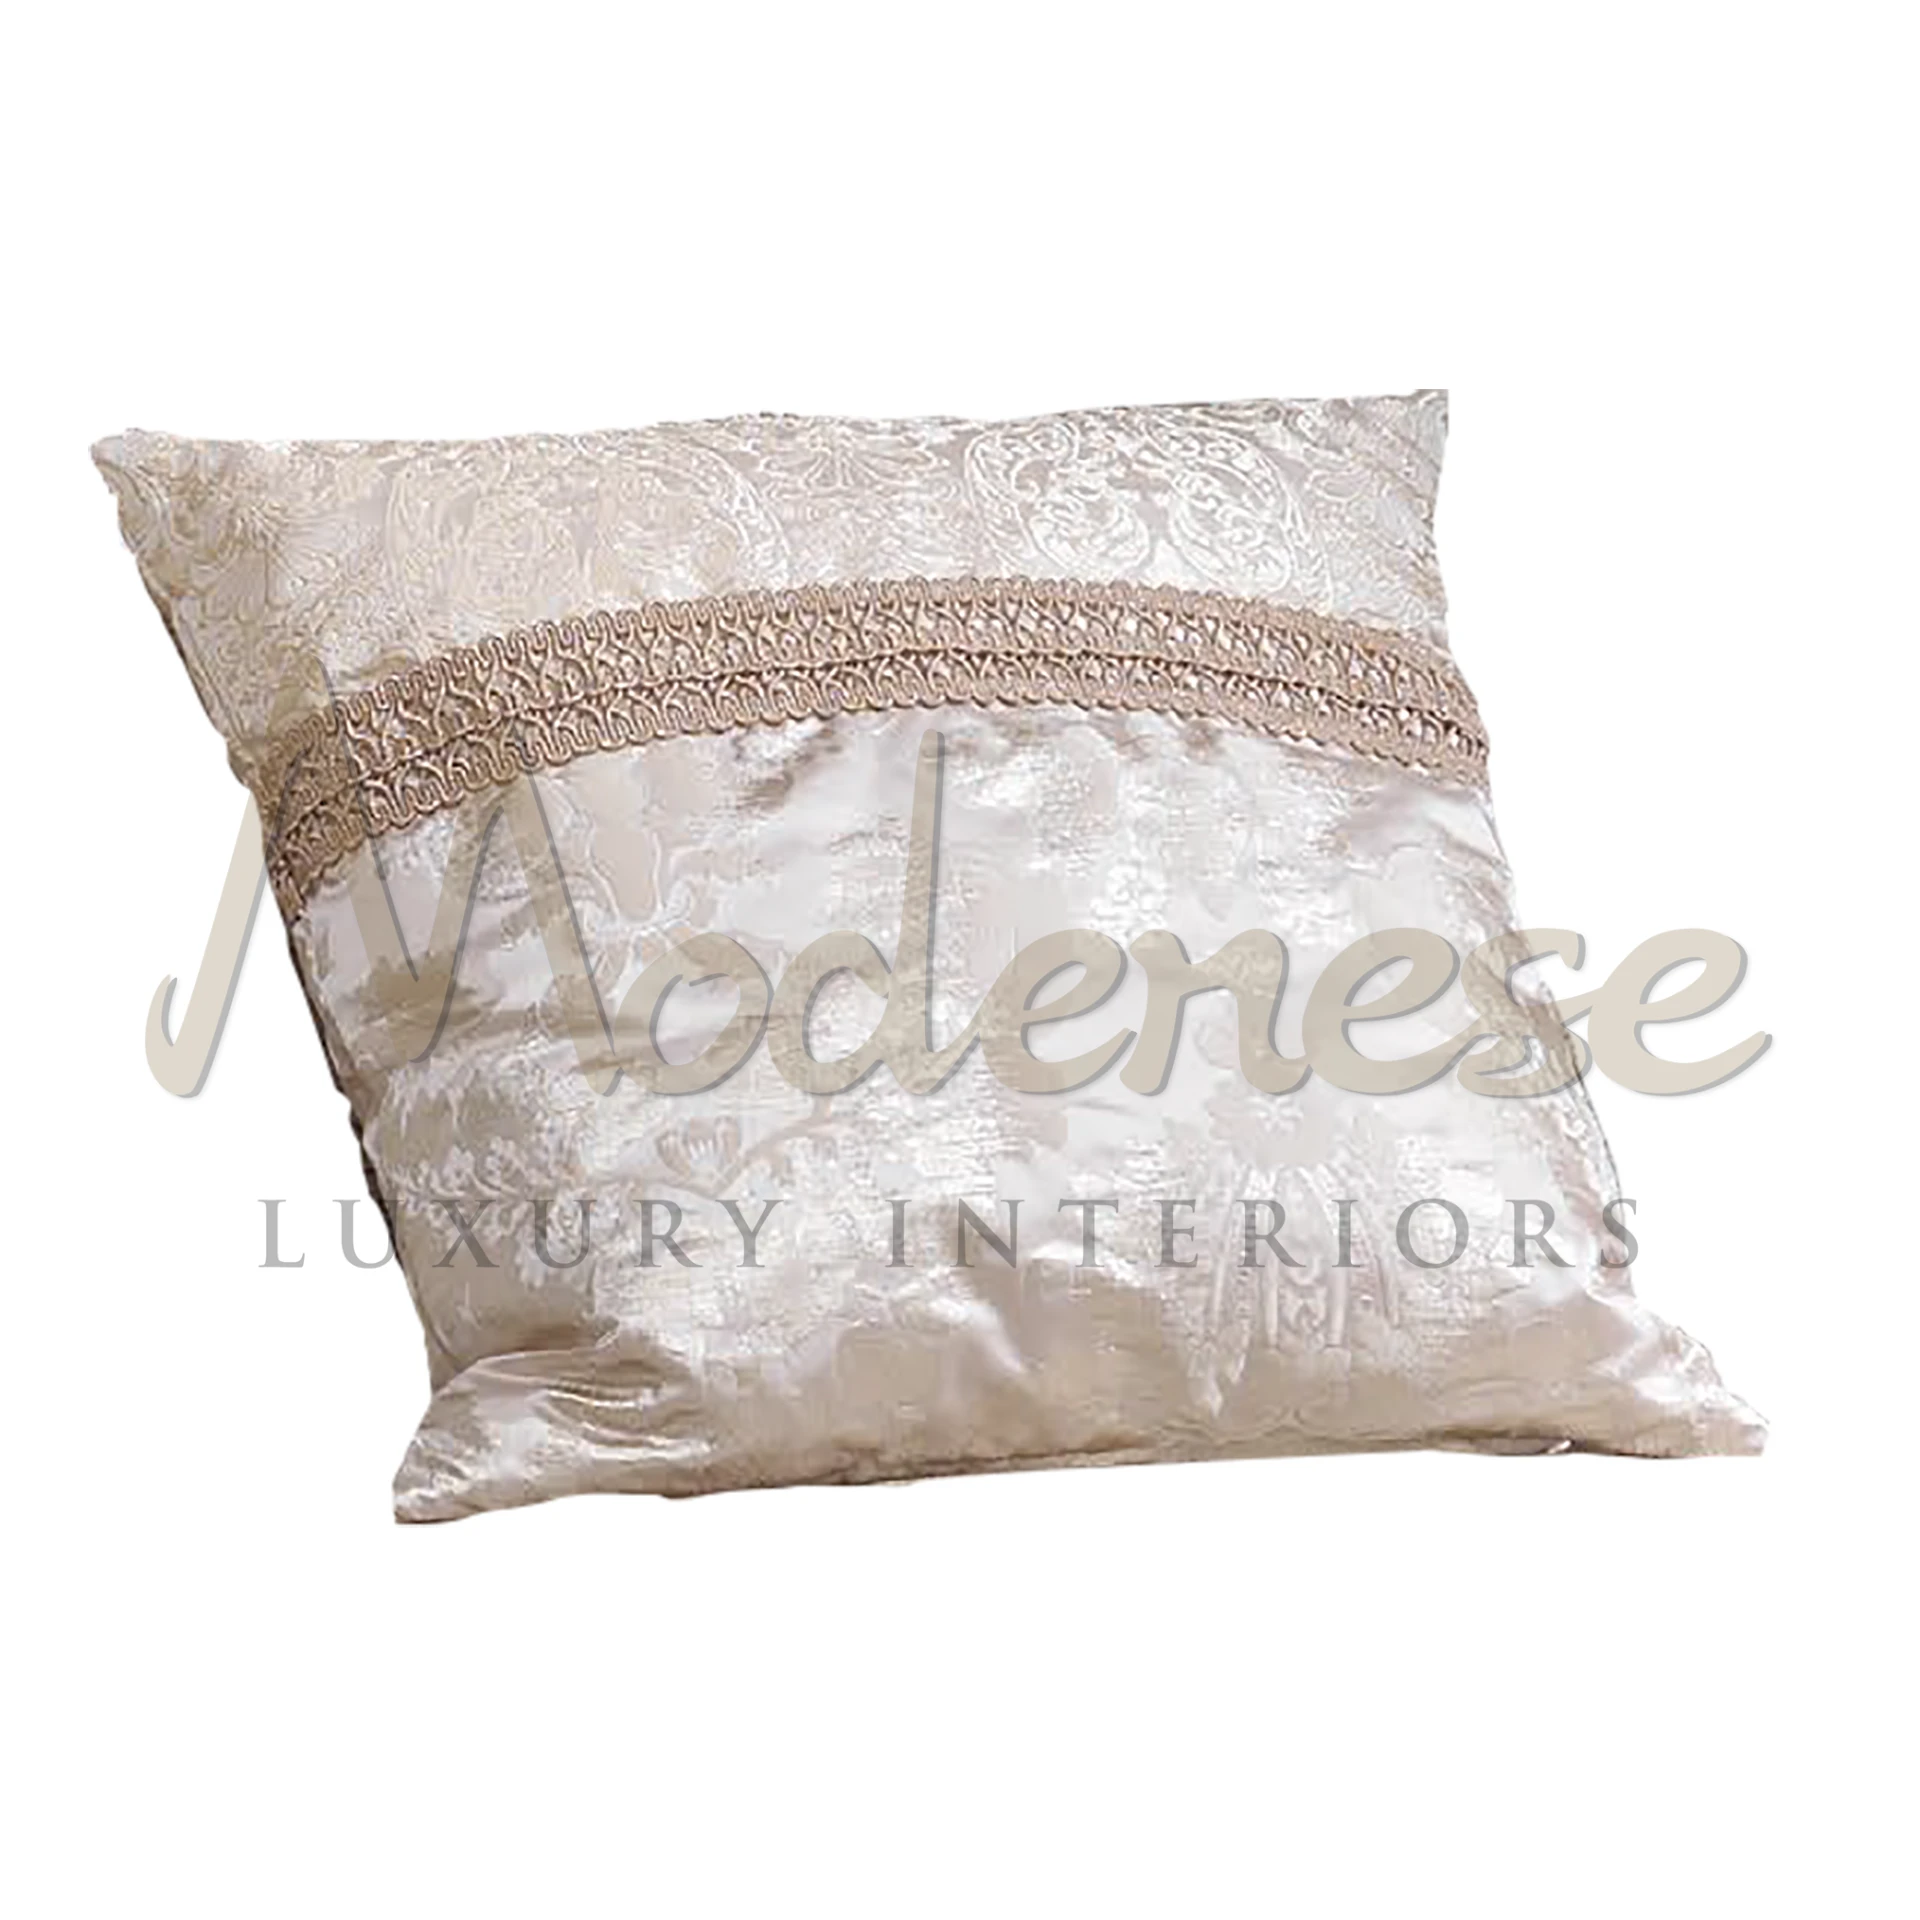 Exquisite Pillow: A masterpiece of design, blending elegance with opulence in Modenese Furniture's detailed craftsmanship.